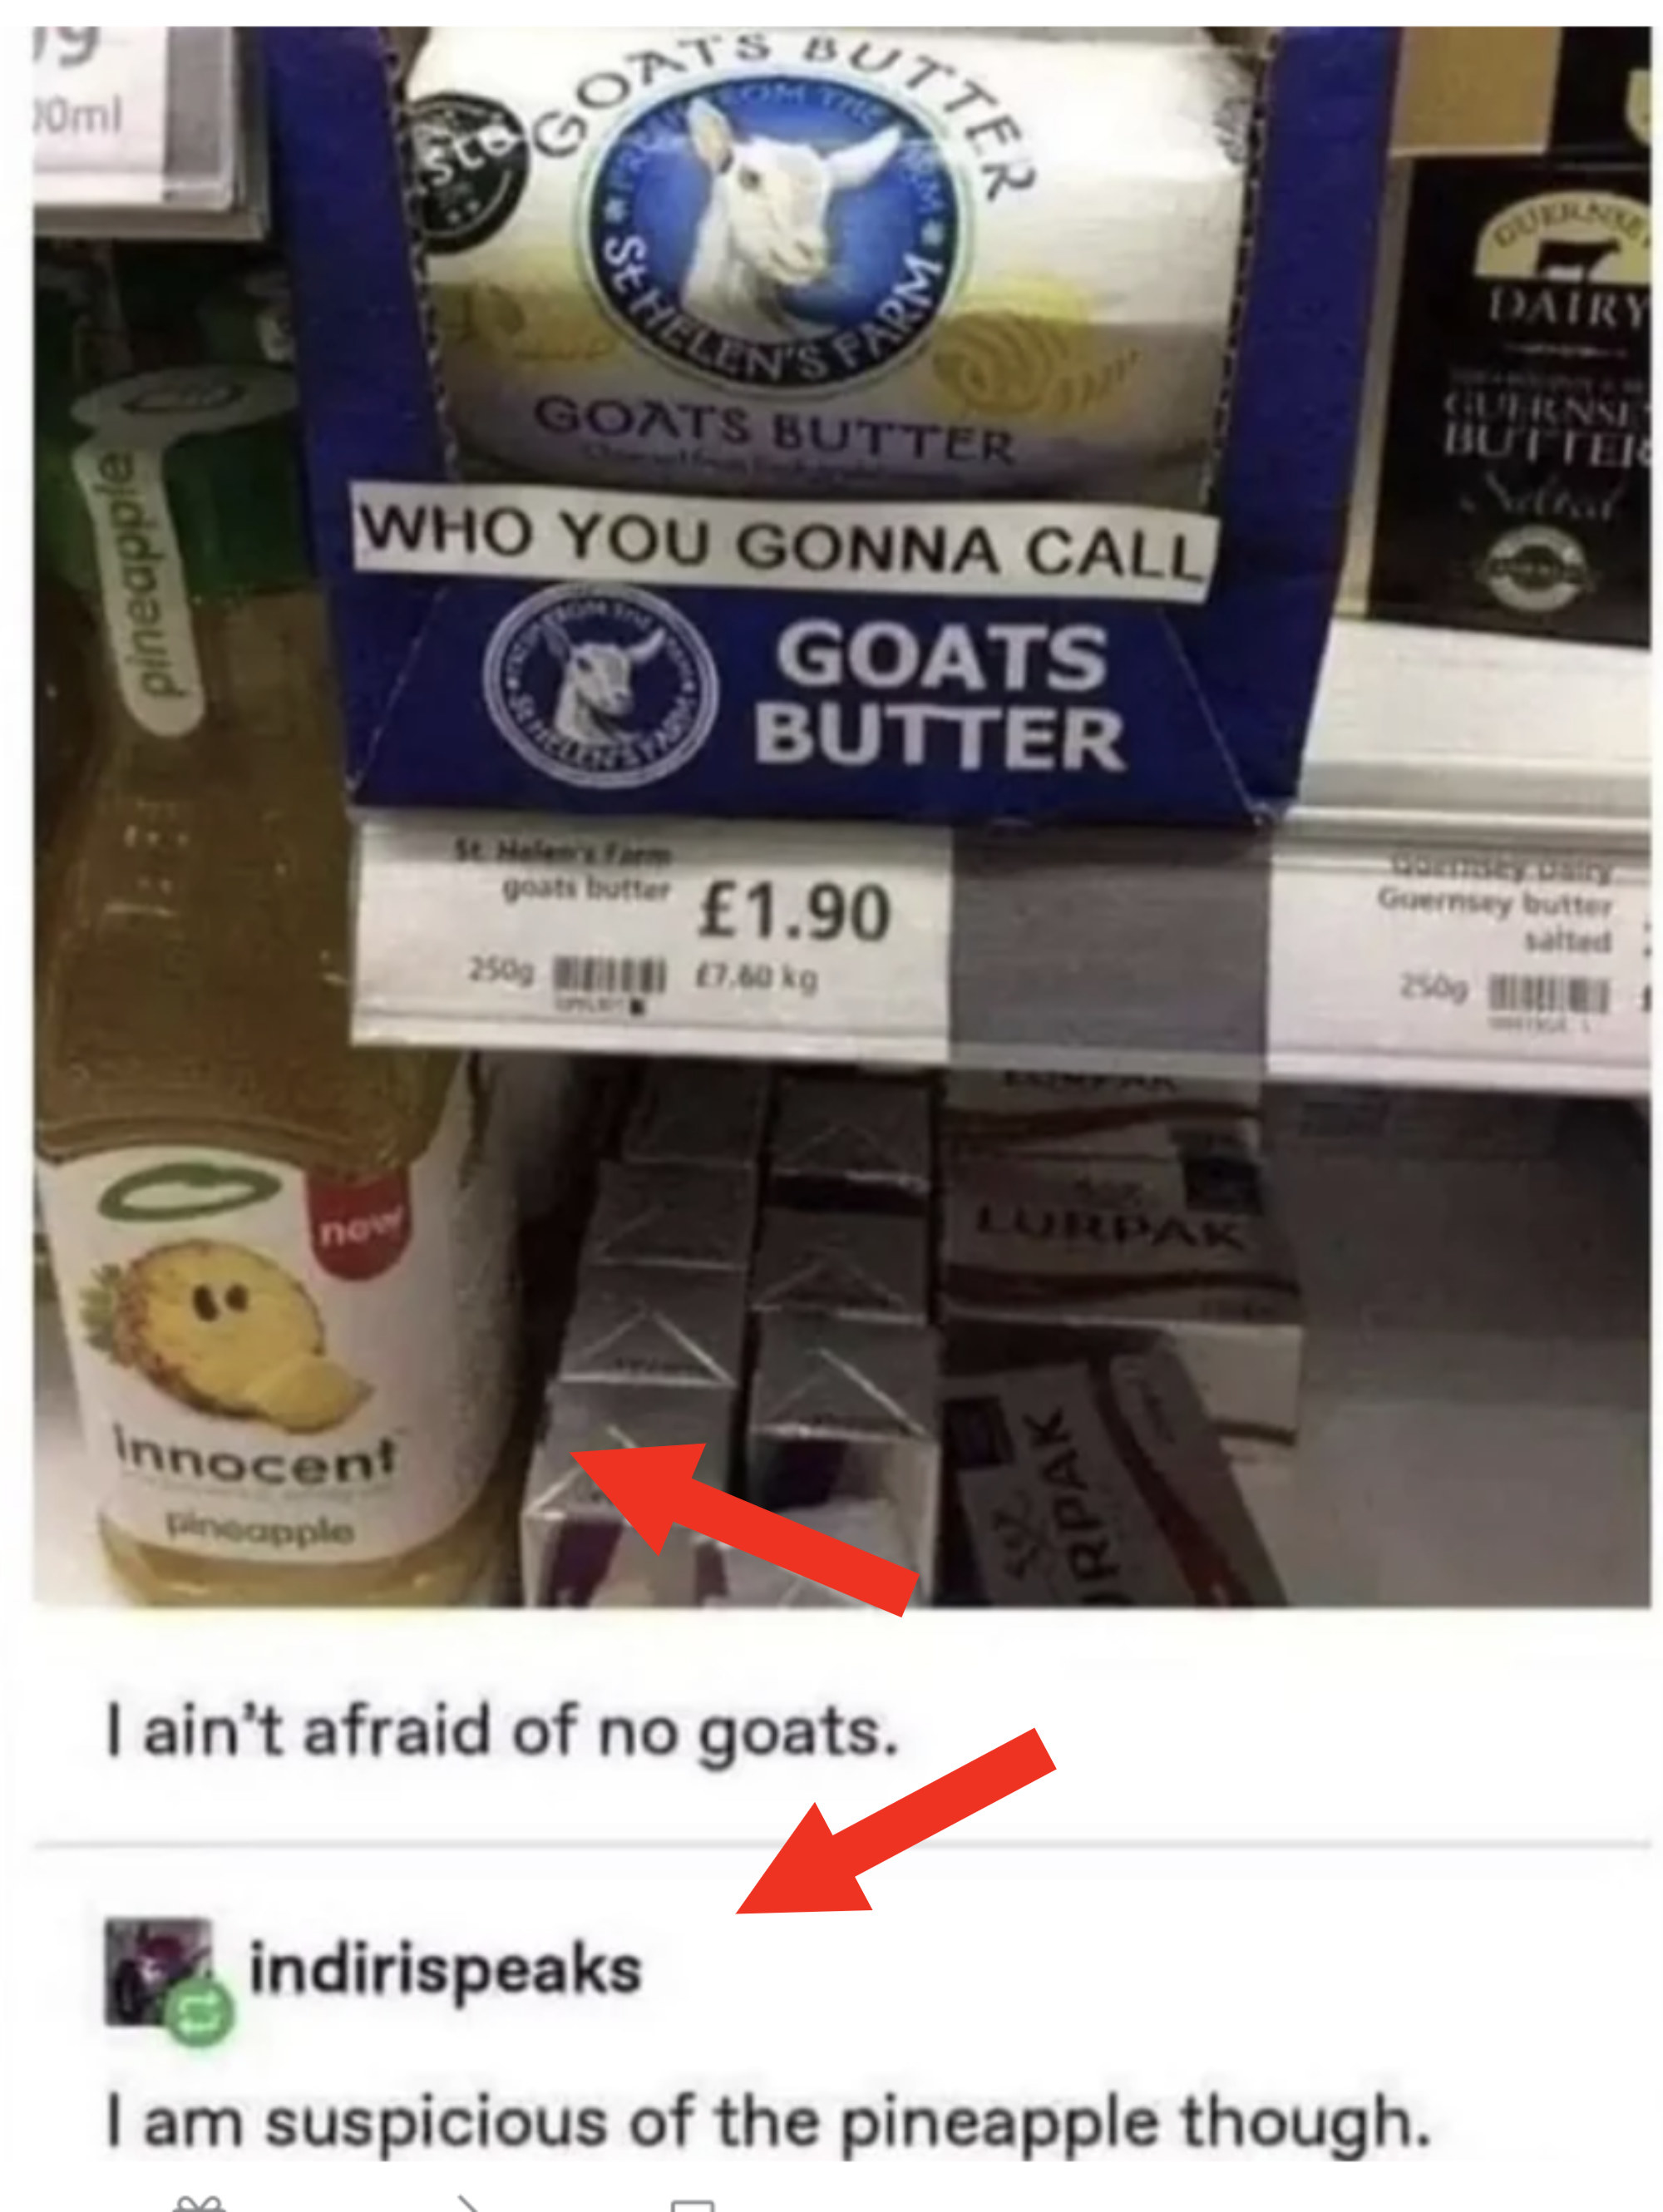 A image says "who you gonna call" over a trace known as Goats Butter, and a commenter says "I am suspicious of the pineapple even though"; in the photo, you may almost definitely furthermore glance a trace of pineapple juice known as Innocent